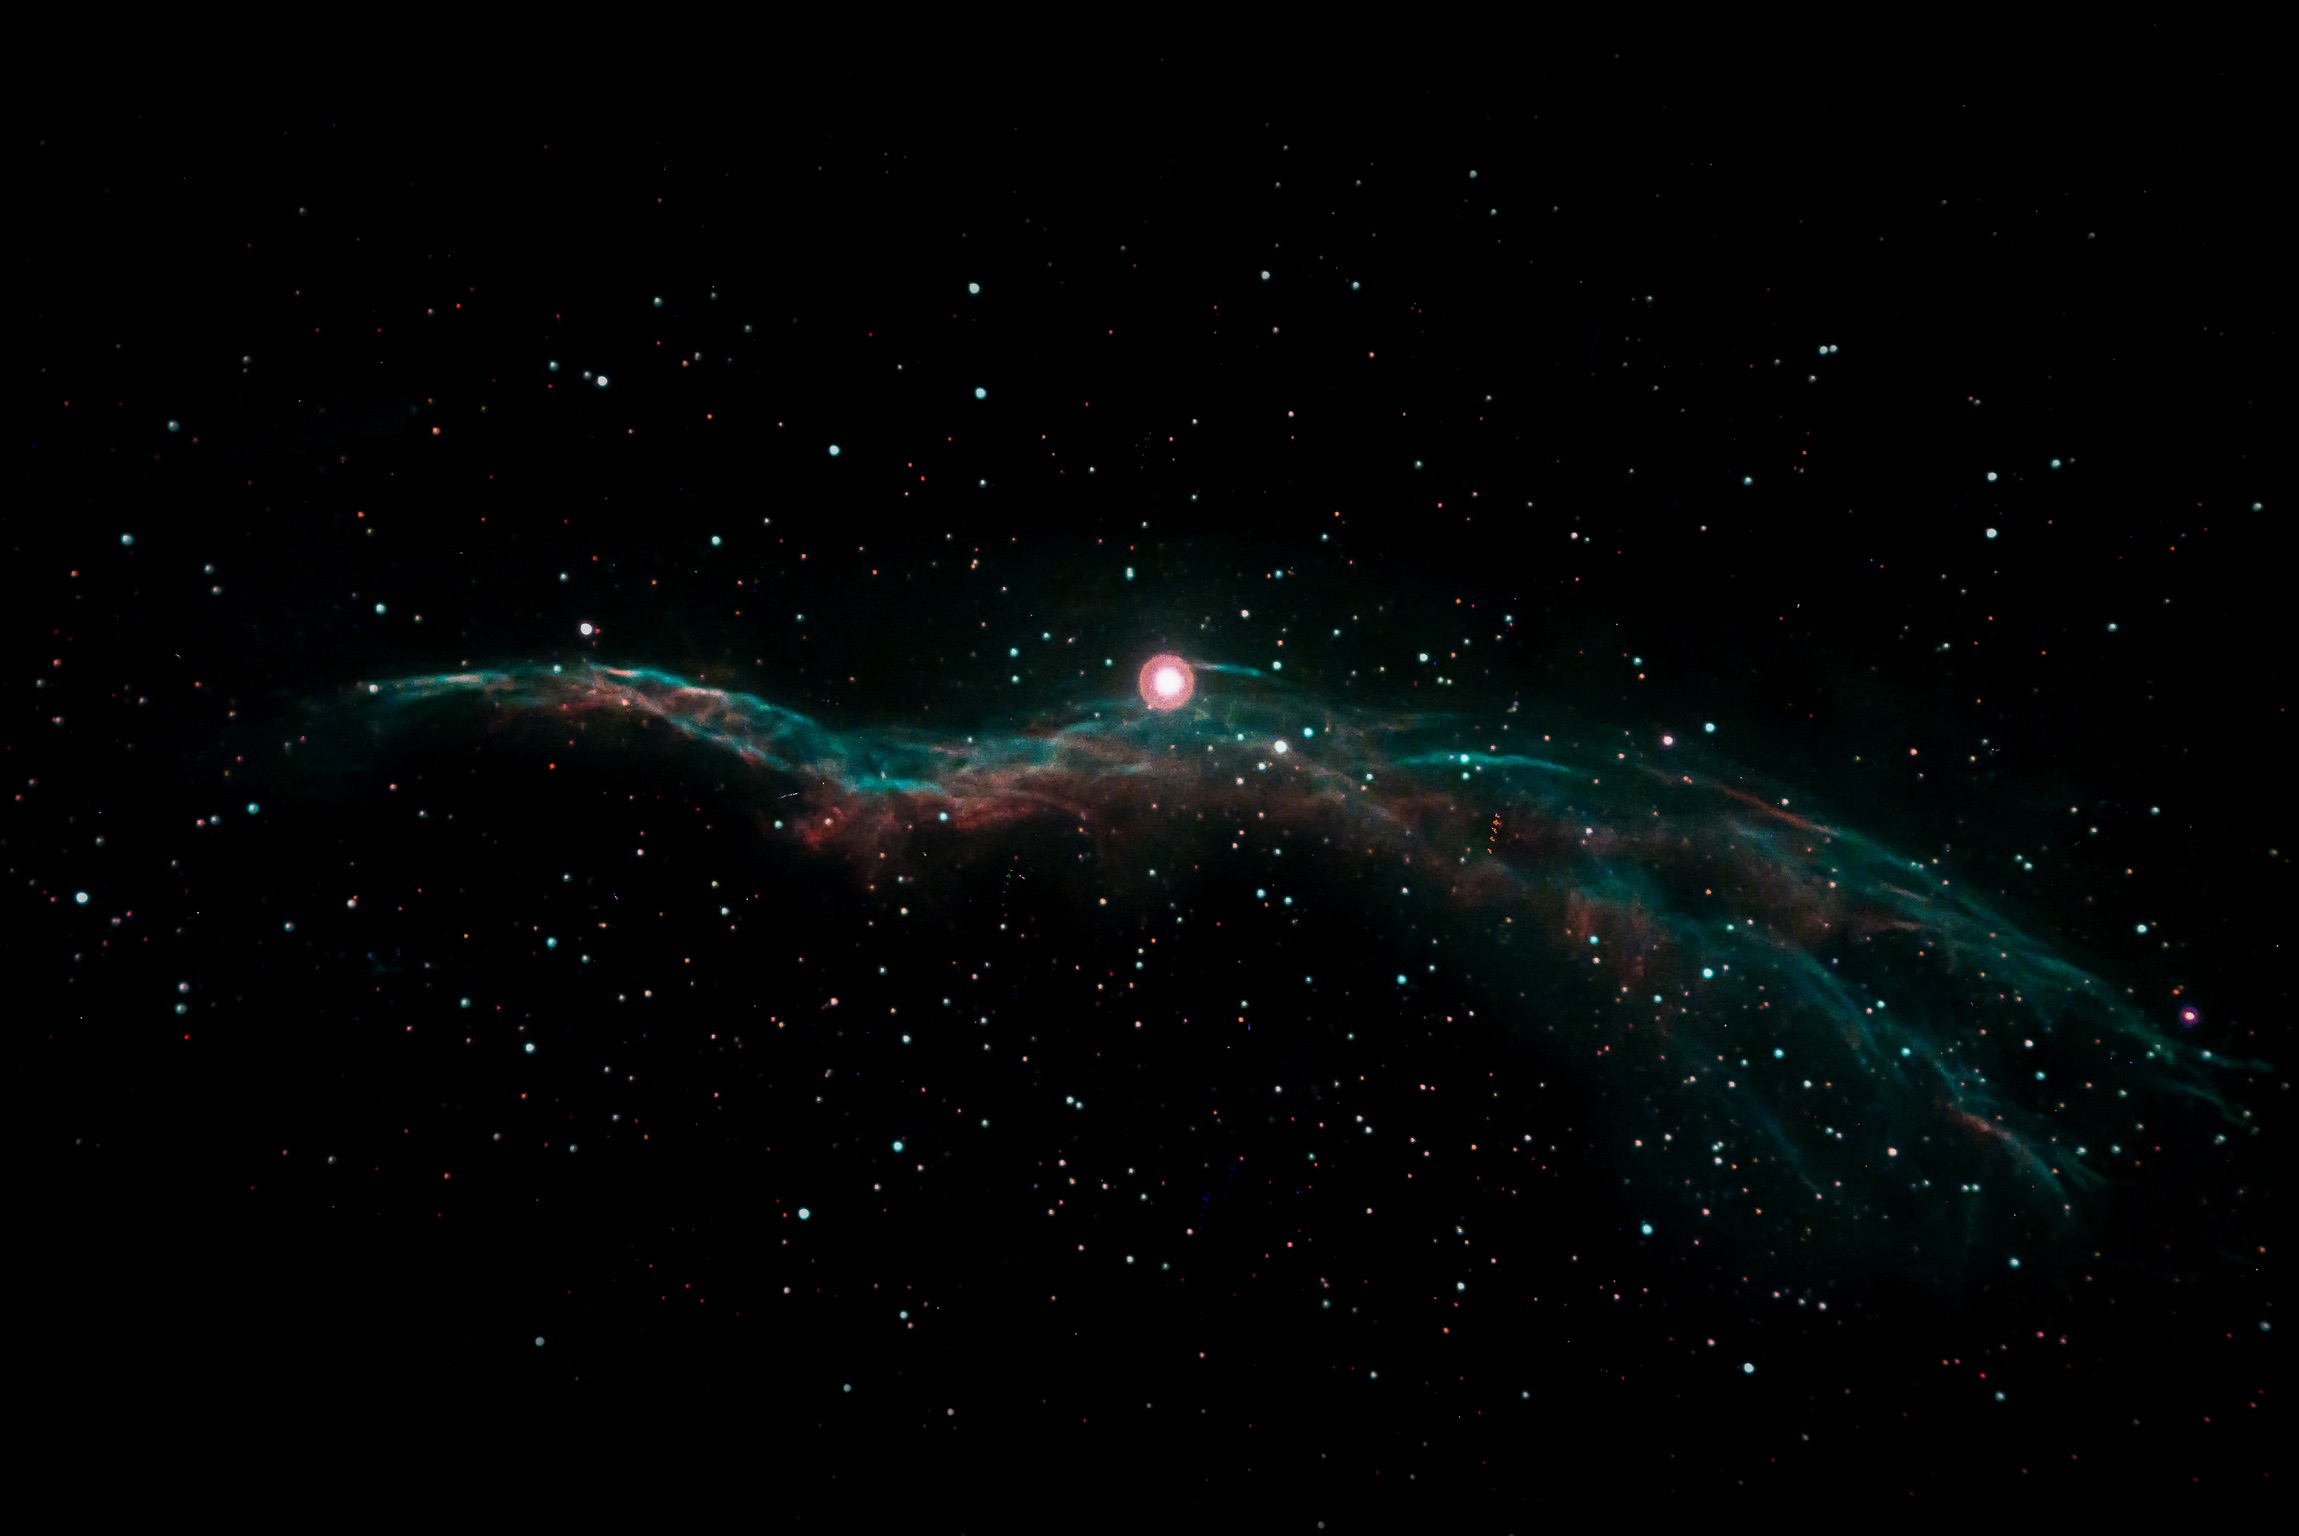 “Witch Broom Nebula”.The source supernova star was 20 times more massive than the Sun, which exploded about 20,000 years ago.At the time of explosion, supernova would have visible during day time.Analysis of emissions from nebula indicate presence of oxygen,sulphur and hydrogen which is strong emitter of X Rays.